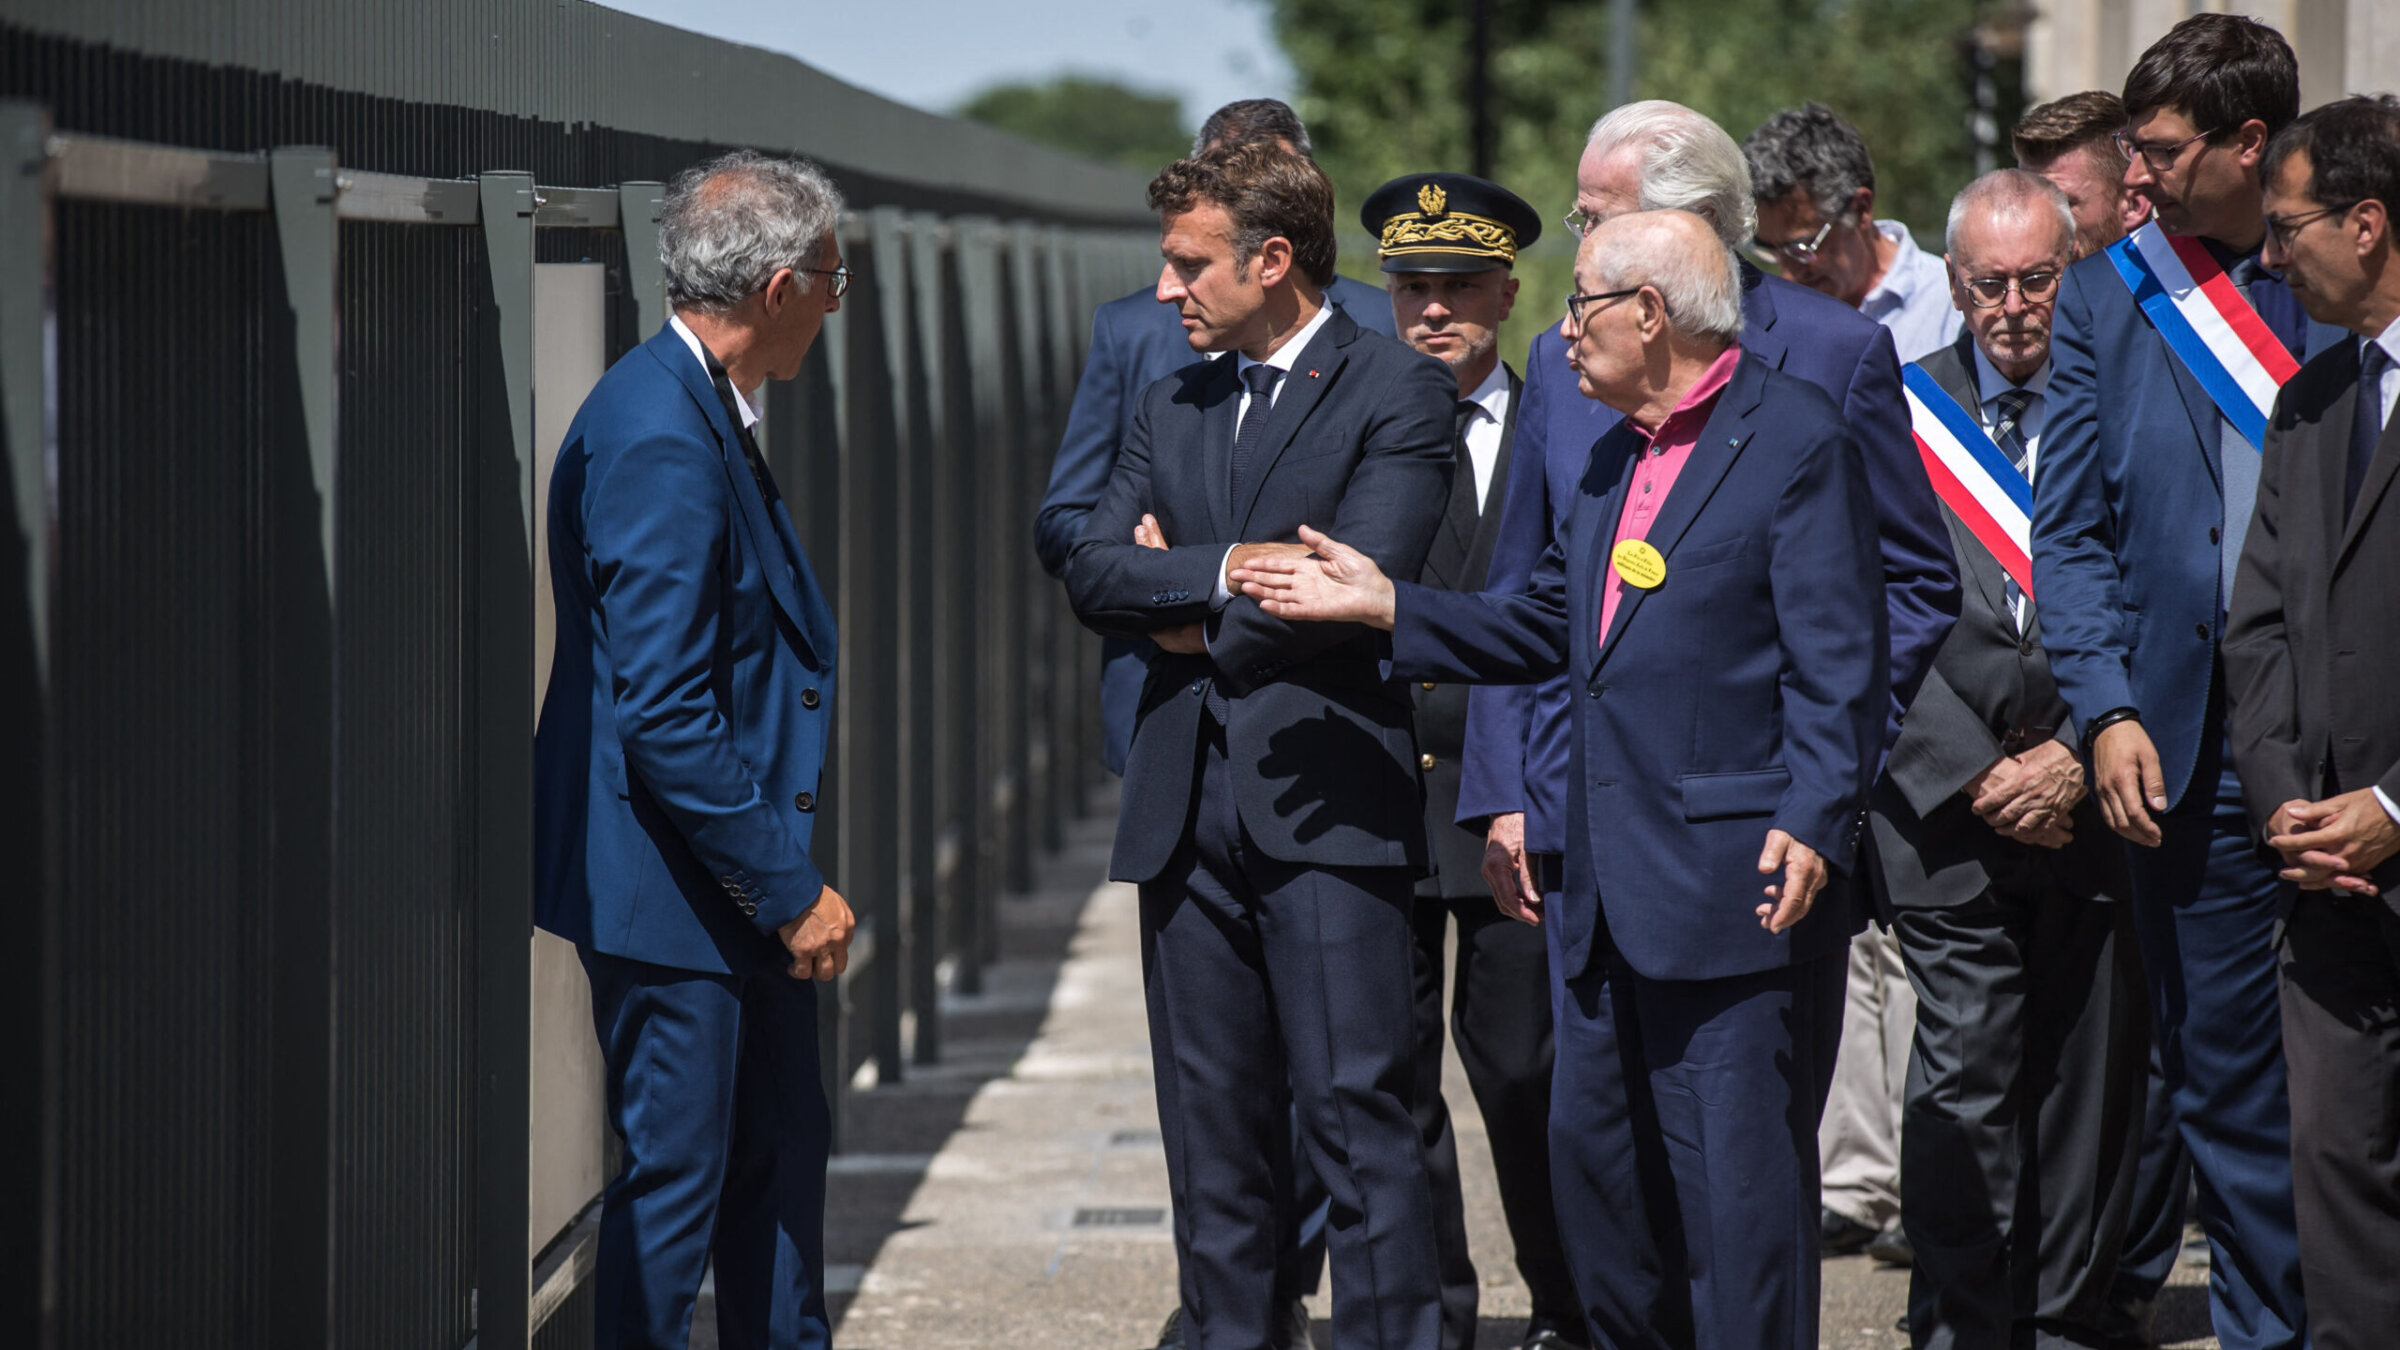 French President Emmanuel Macron, crossing his arms, visits the Pithiviers Holocaust museum in France, July 17, 2022. (Christophe Petit Tesson/Pool/AFP via Getty Images)